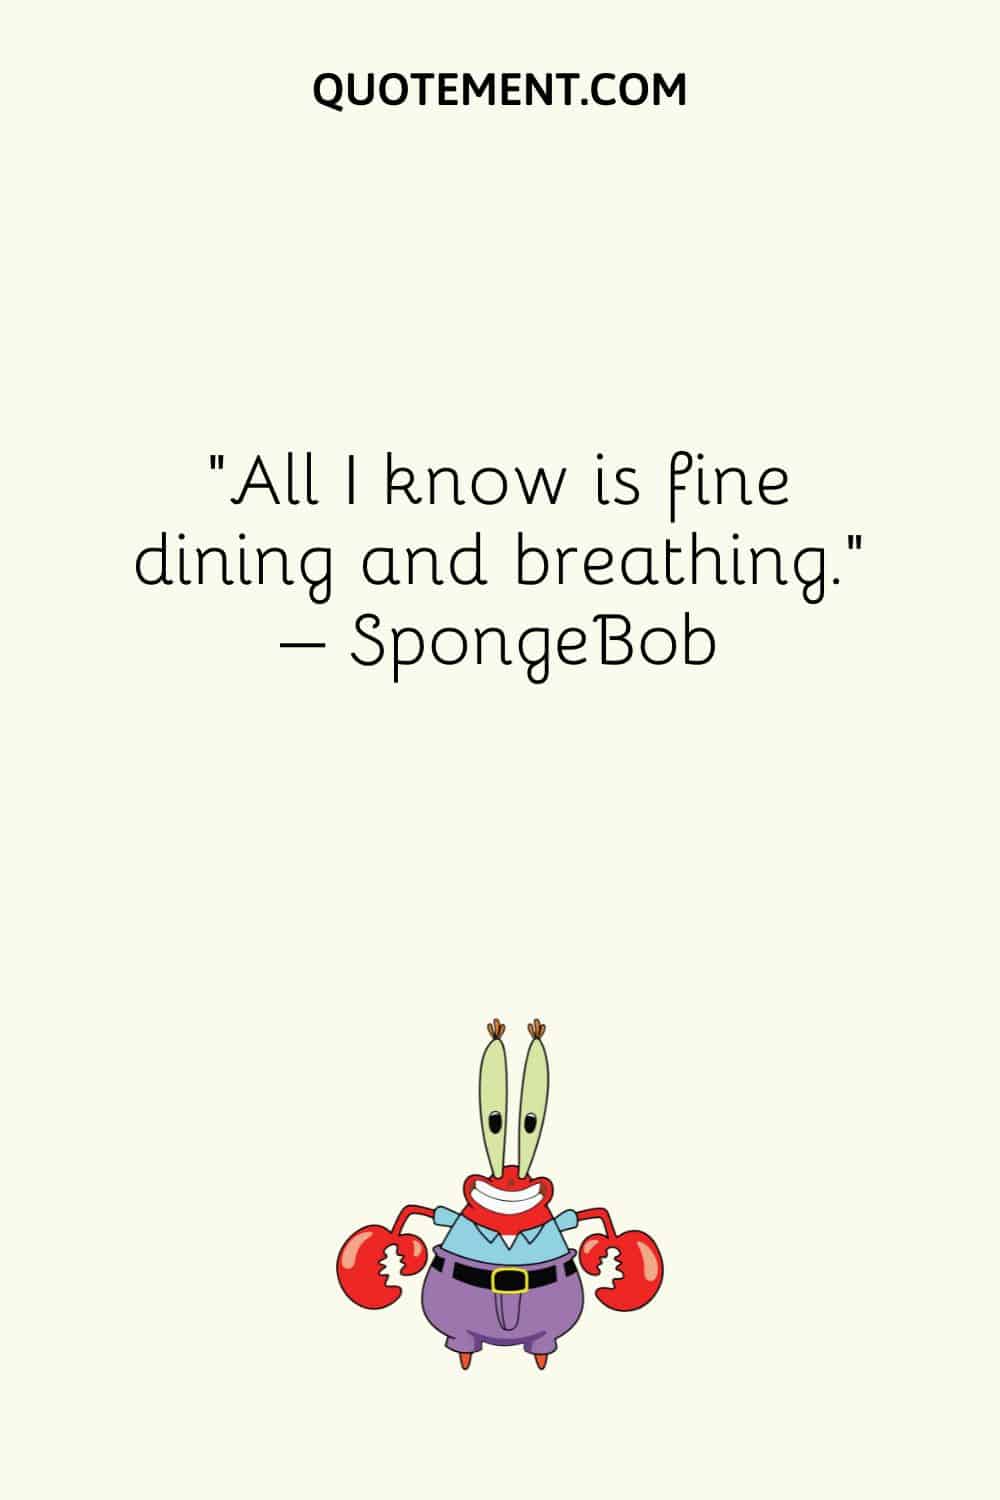 “All I know is fine dining and breathing.” – SpongeBob